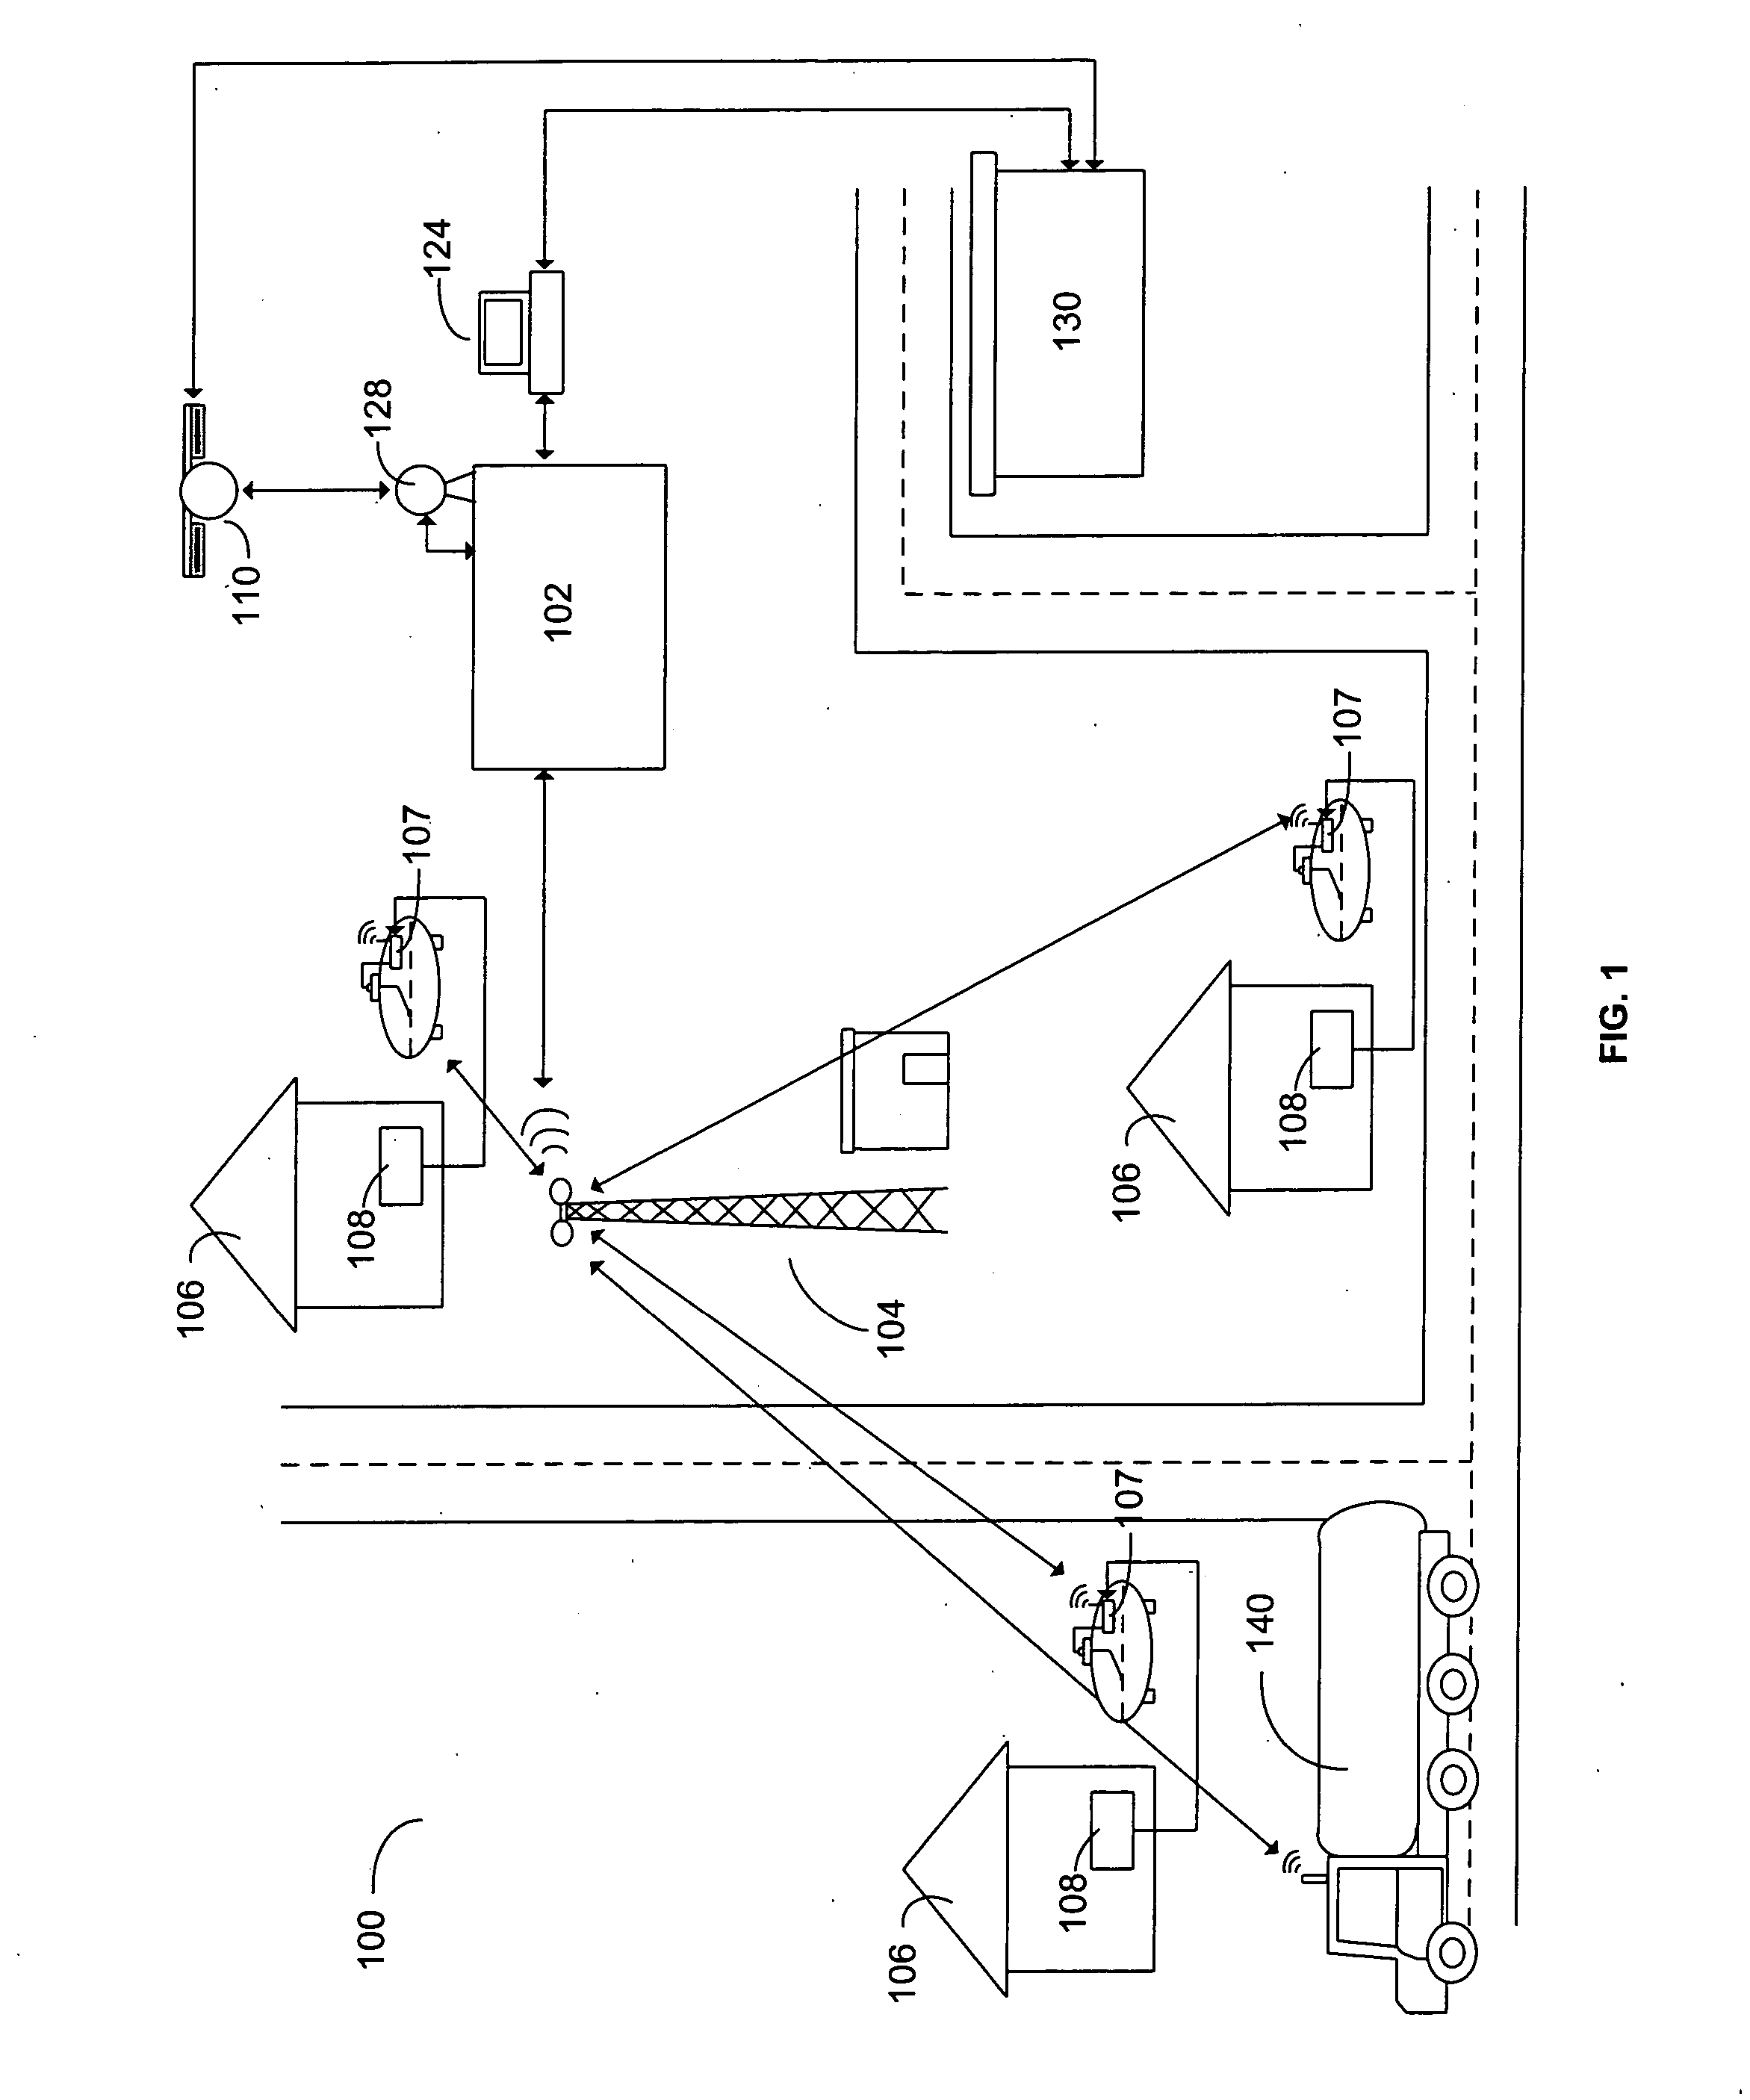 System for monitoring propane or other consumable liquid in remotely located storage tanks